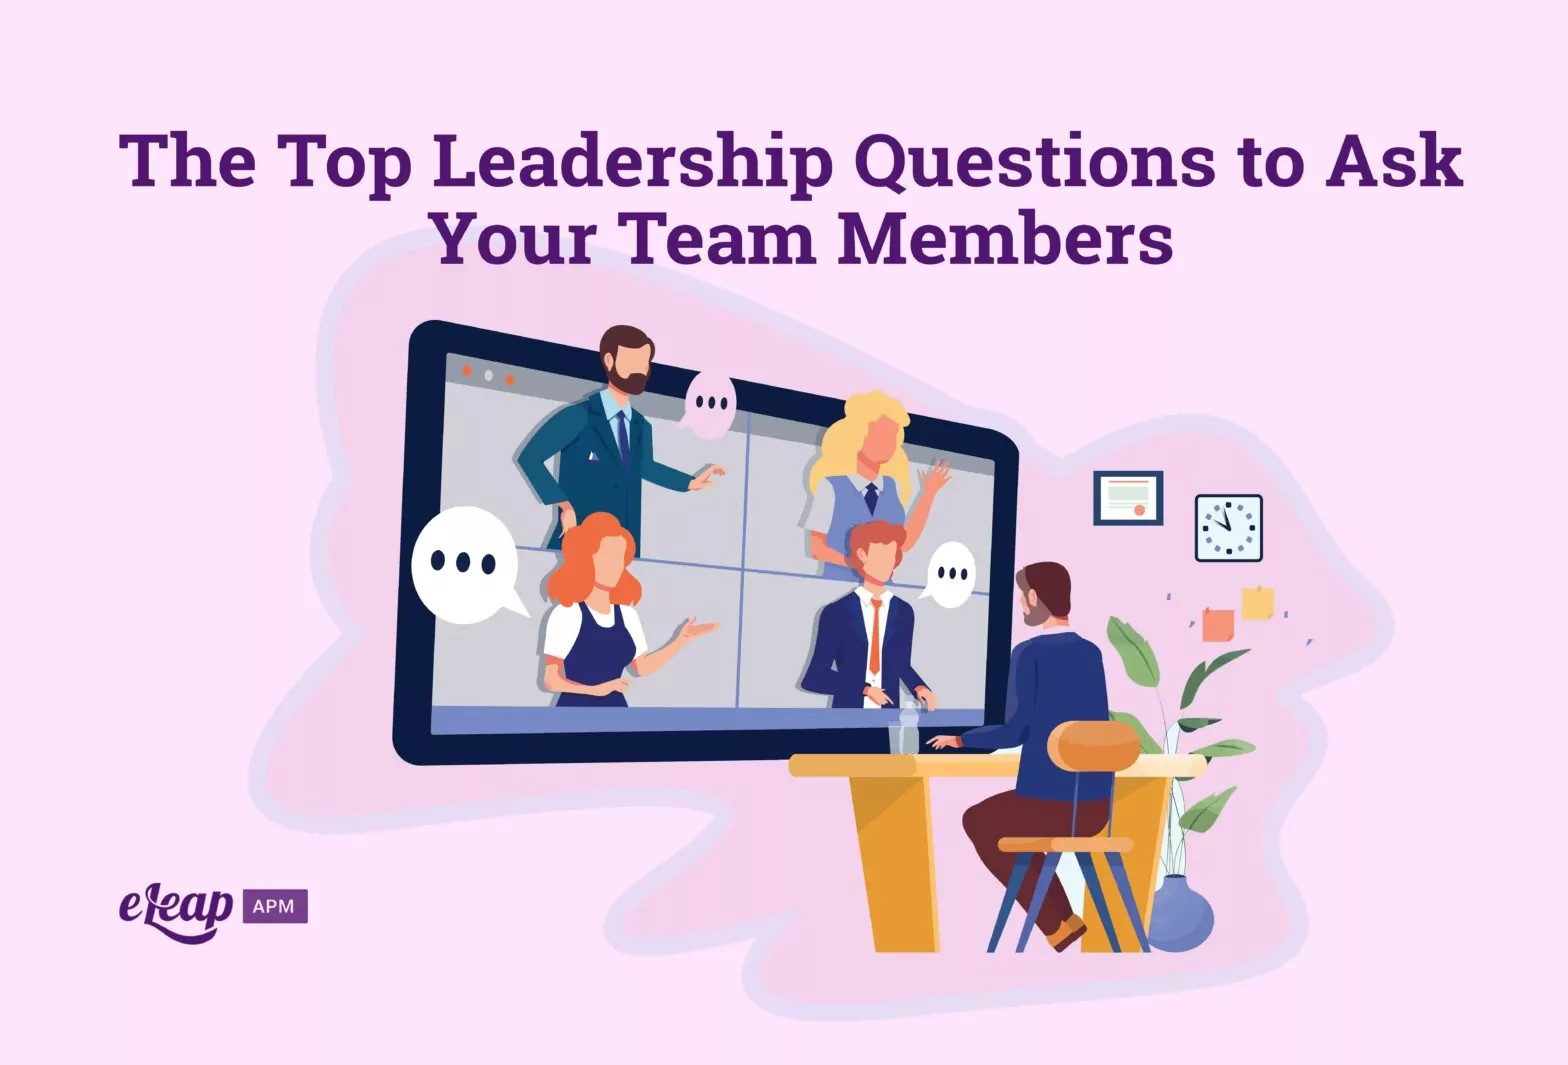 The Top Leadership Questions to Ask Your Team Members